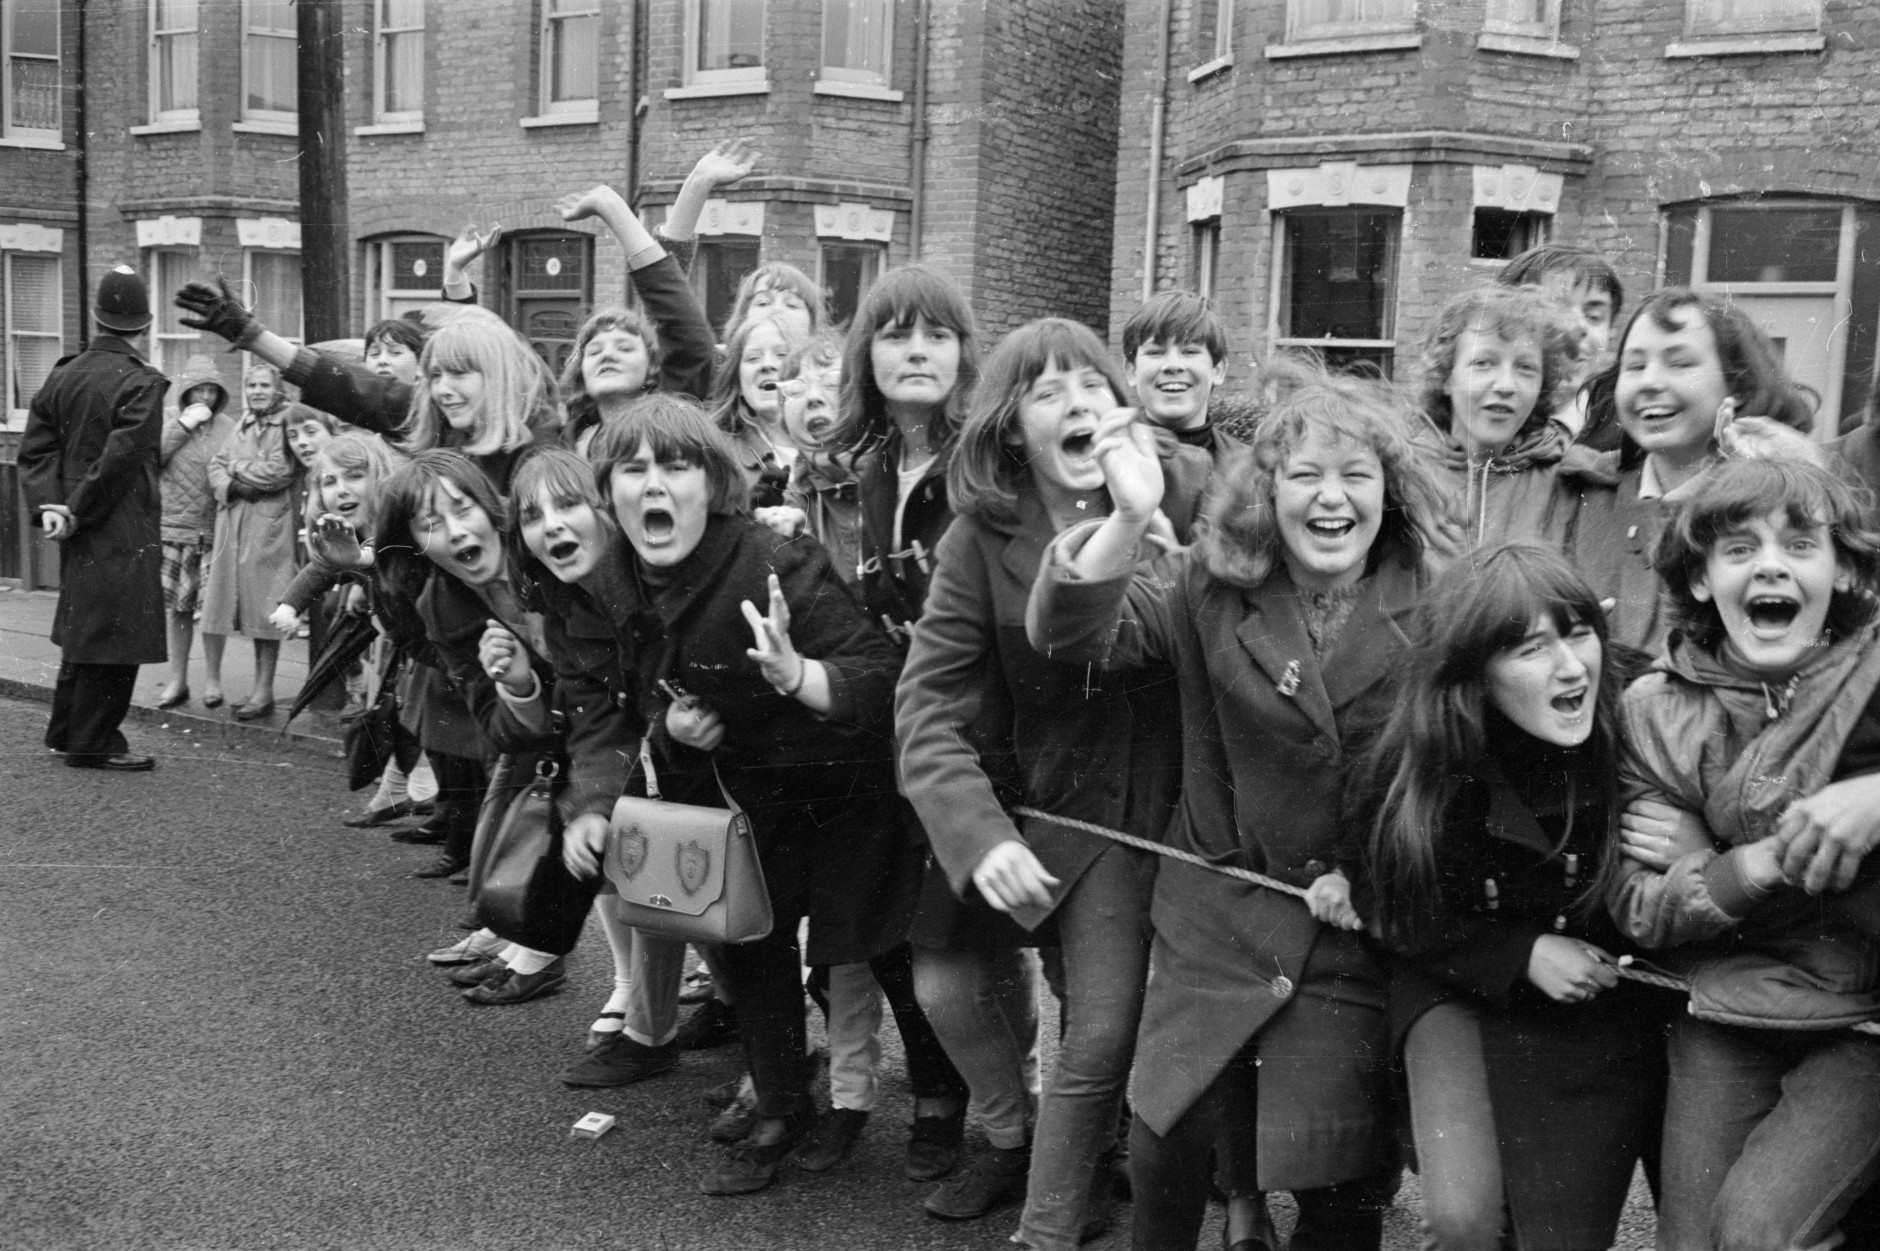 15th March 1965:  British police hold back excited young Beatles fans hoping for a glimpse of their musical heroes during the filming of the musical 'Help', on location in London.  (Photo by Stan Meagher/Express/Getty Images)